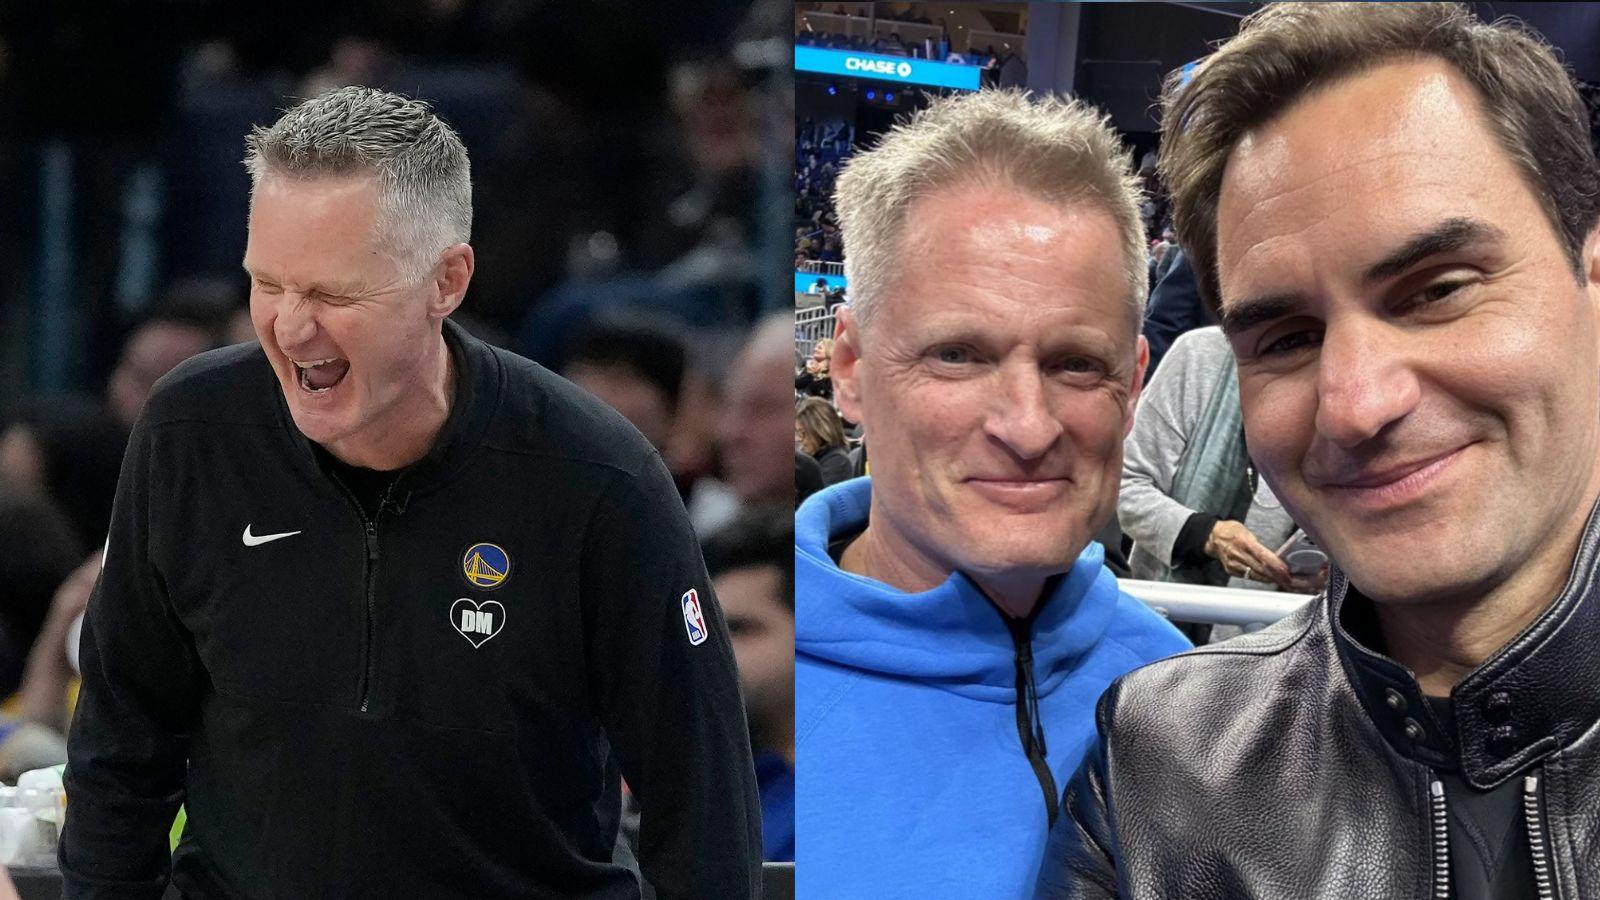 Steve Kerr (left) as head coach of the Golden State Warriors and Steve Gillis and Roger Federer (right) posing for a selfie at a Warriors game on March 9.